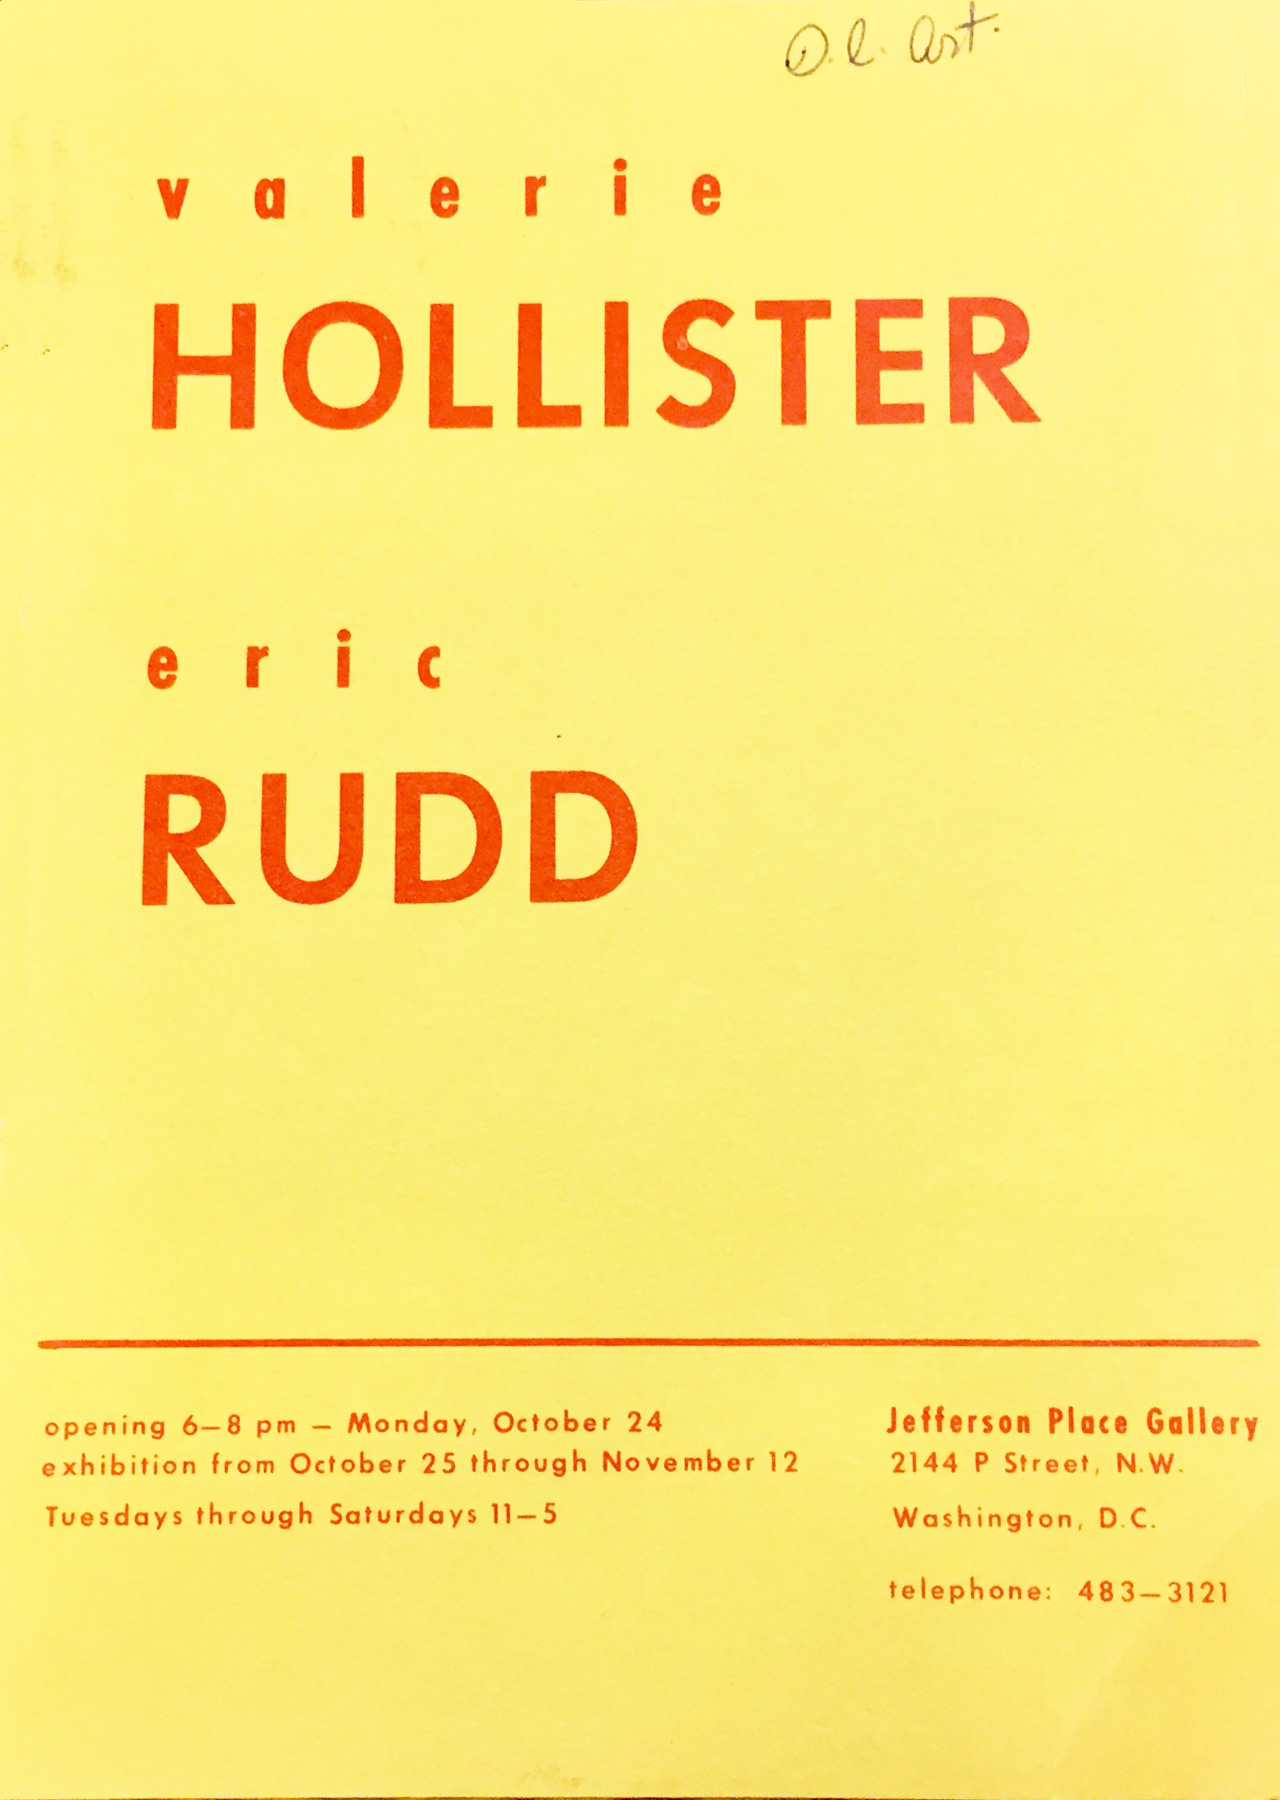 Announcement card for Valerie Hollister and Eric Rudd at Jefferson Place Gallery